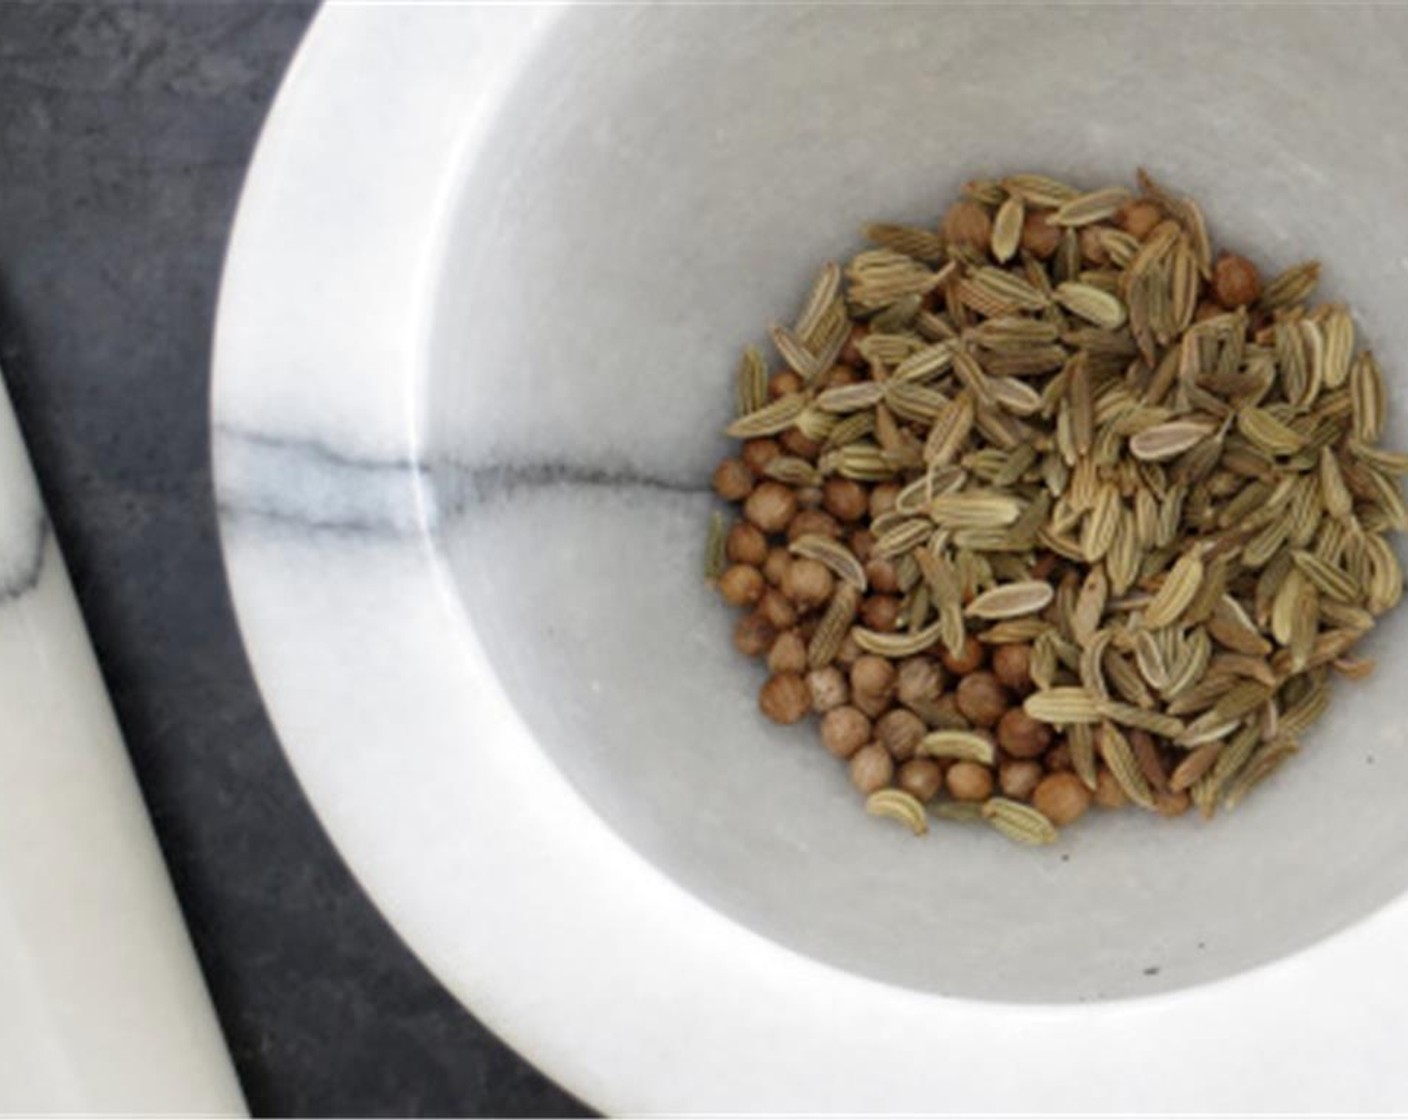 step 5 In a mortar and pestle, grind together the whole Whole Coriander Seeds (1 tsp) and Fennel Seeds (1 tsp) Mix in the Kosher Salt (1/2 tsp), Brown Sugar (1 Tbsp) Stir to combine. Sprinkle the spice blend evenly over squash. Bake 20 minutes.